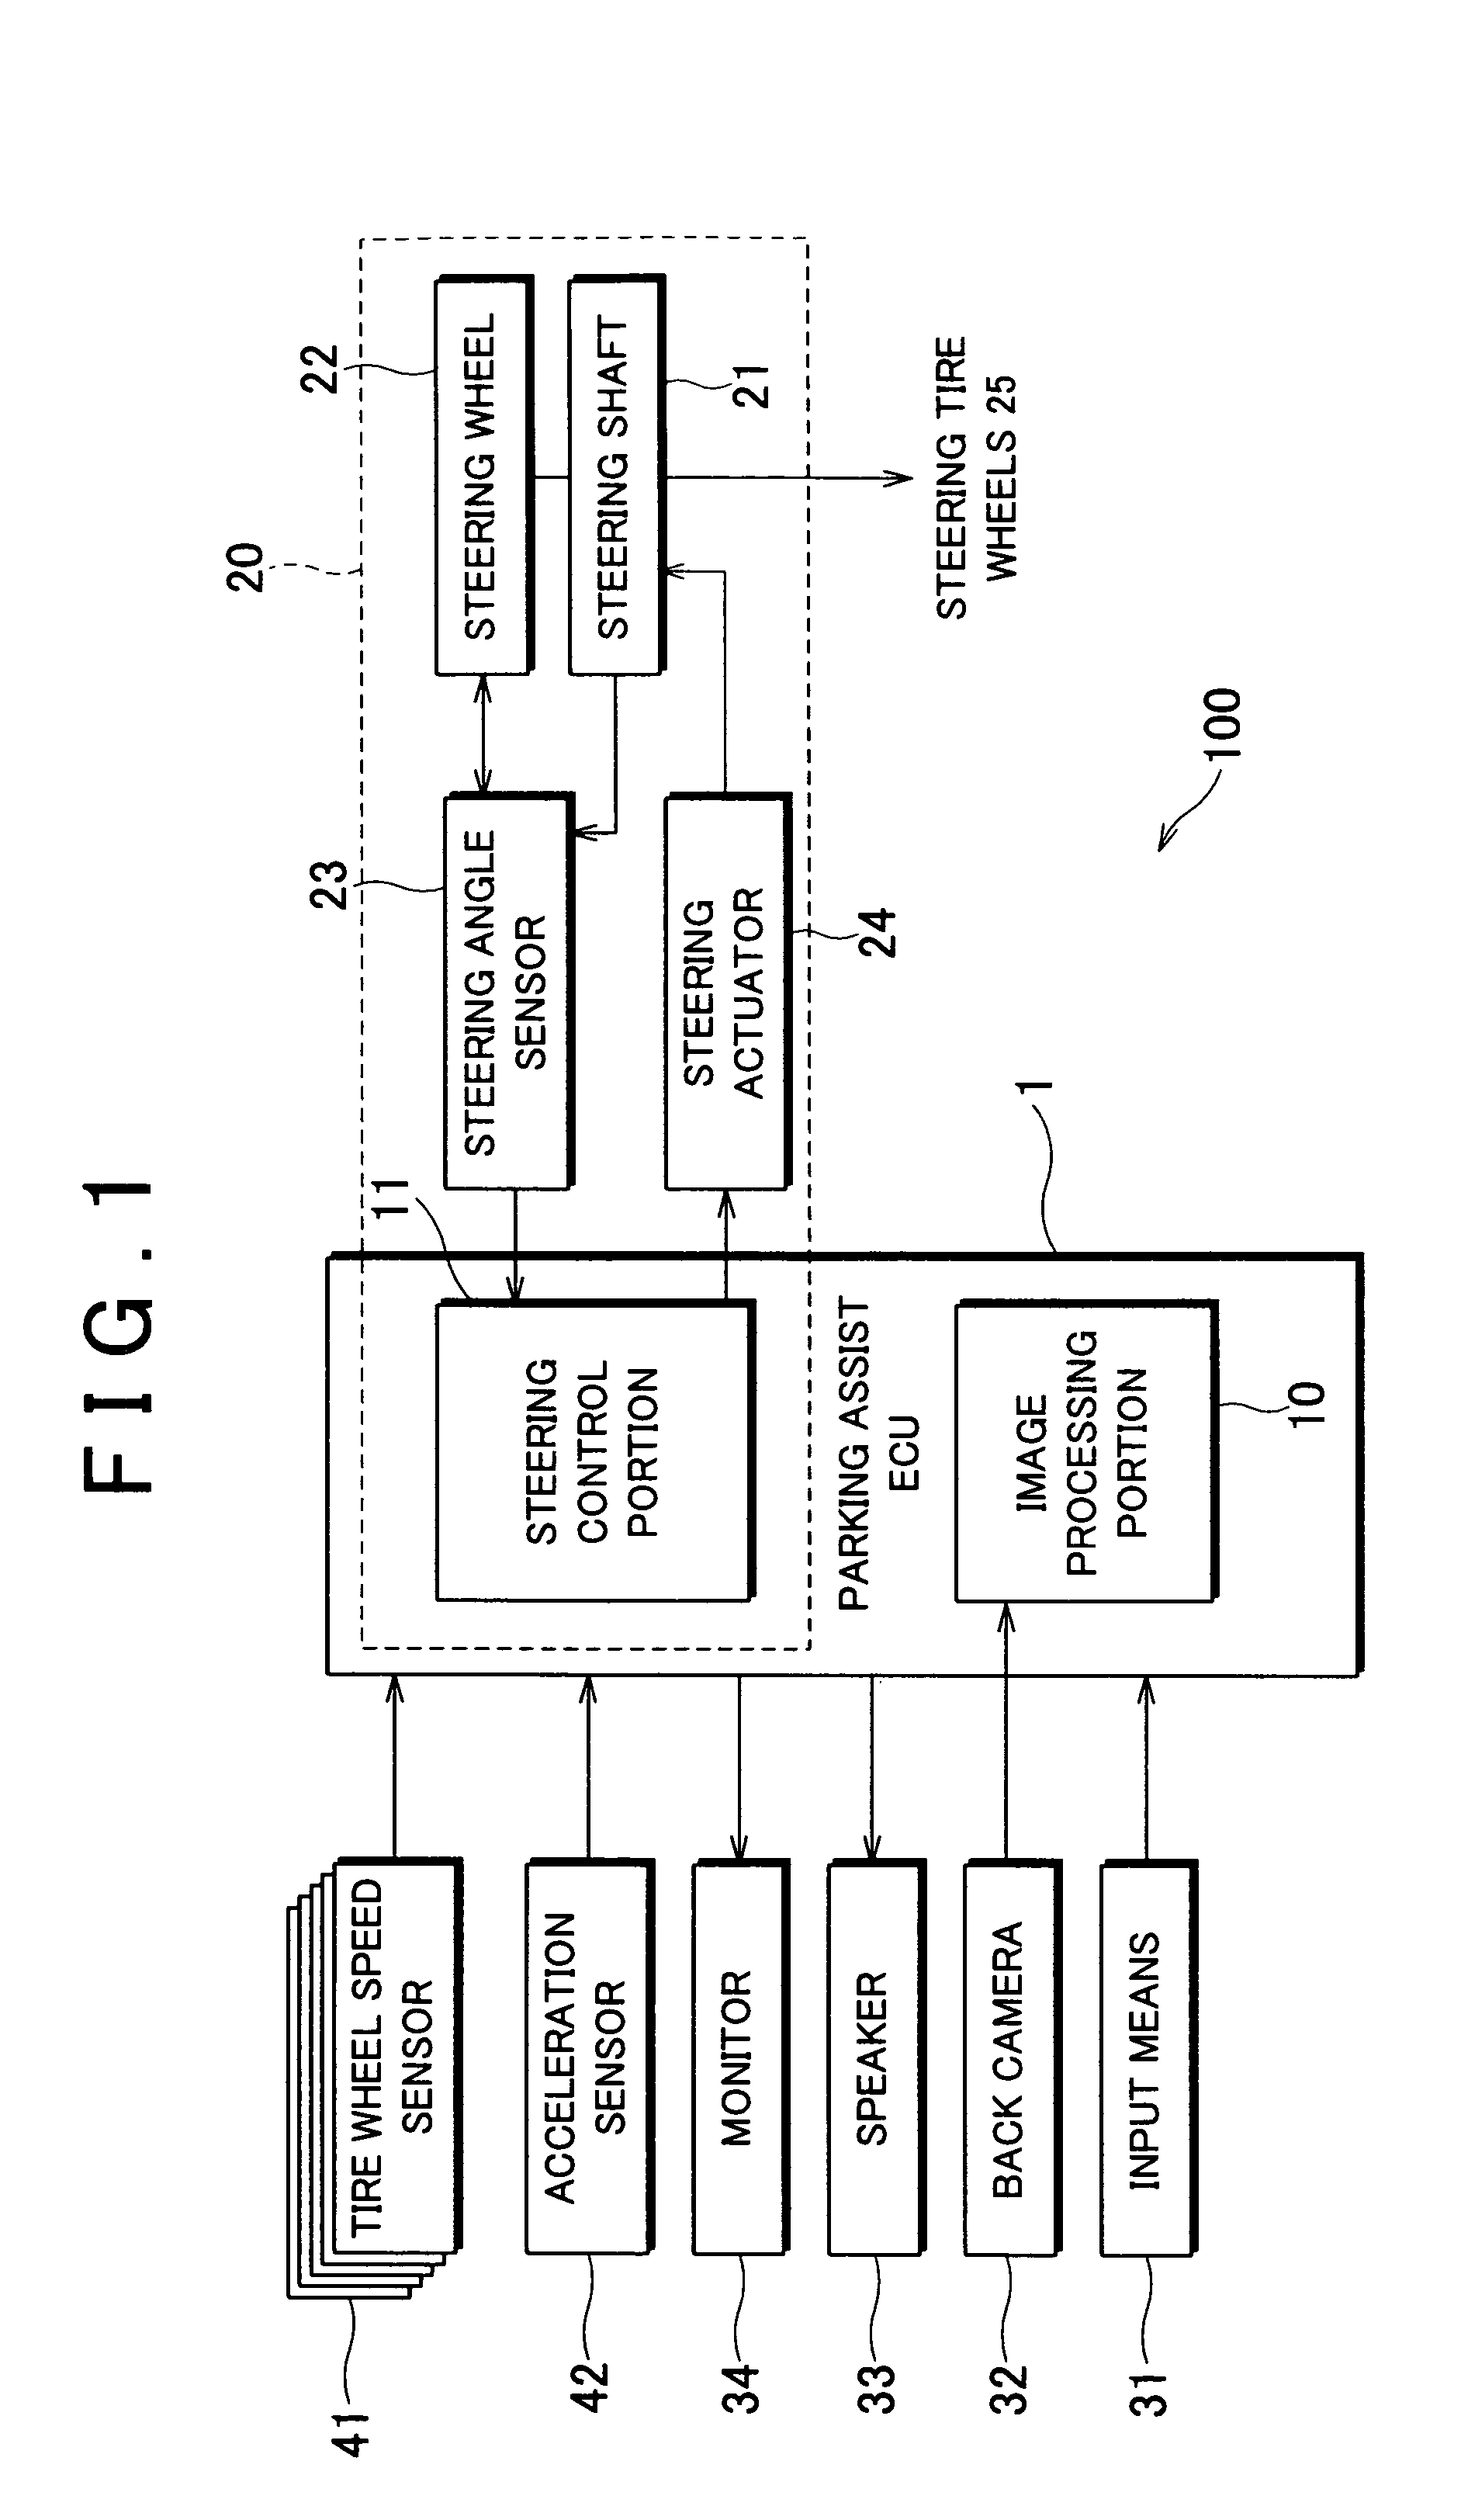 Driving assist apparatus and method for vehicle